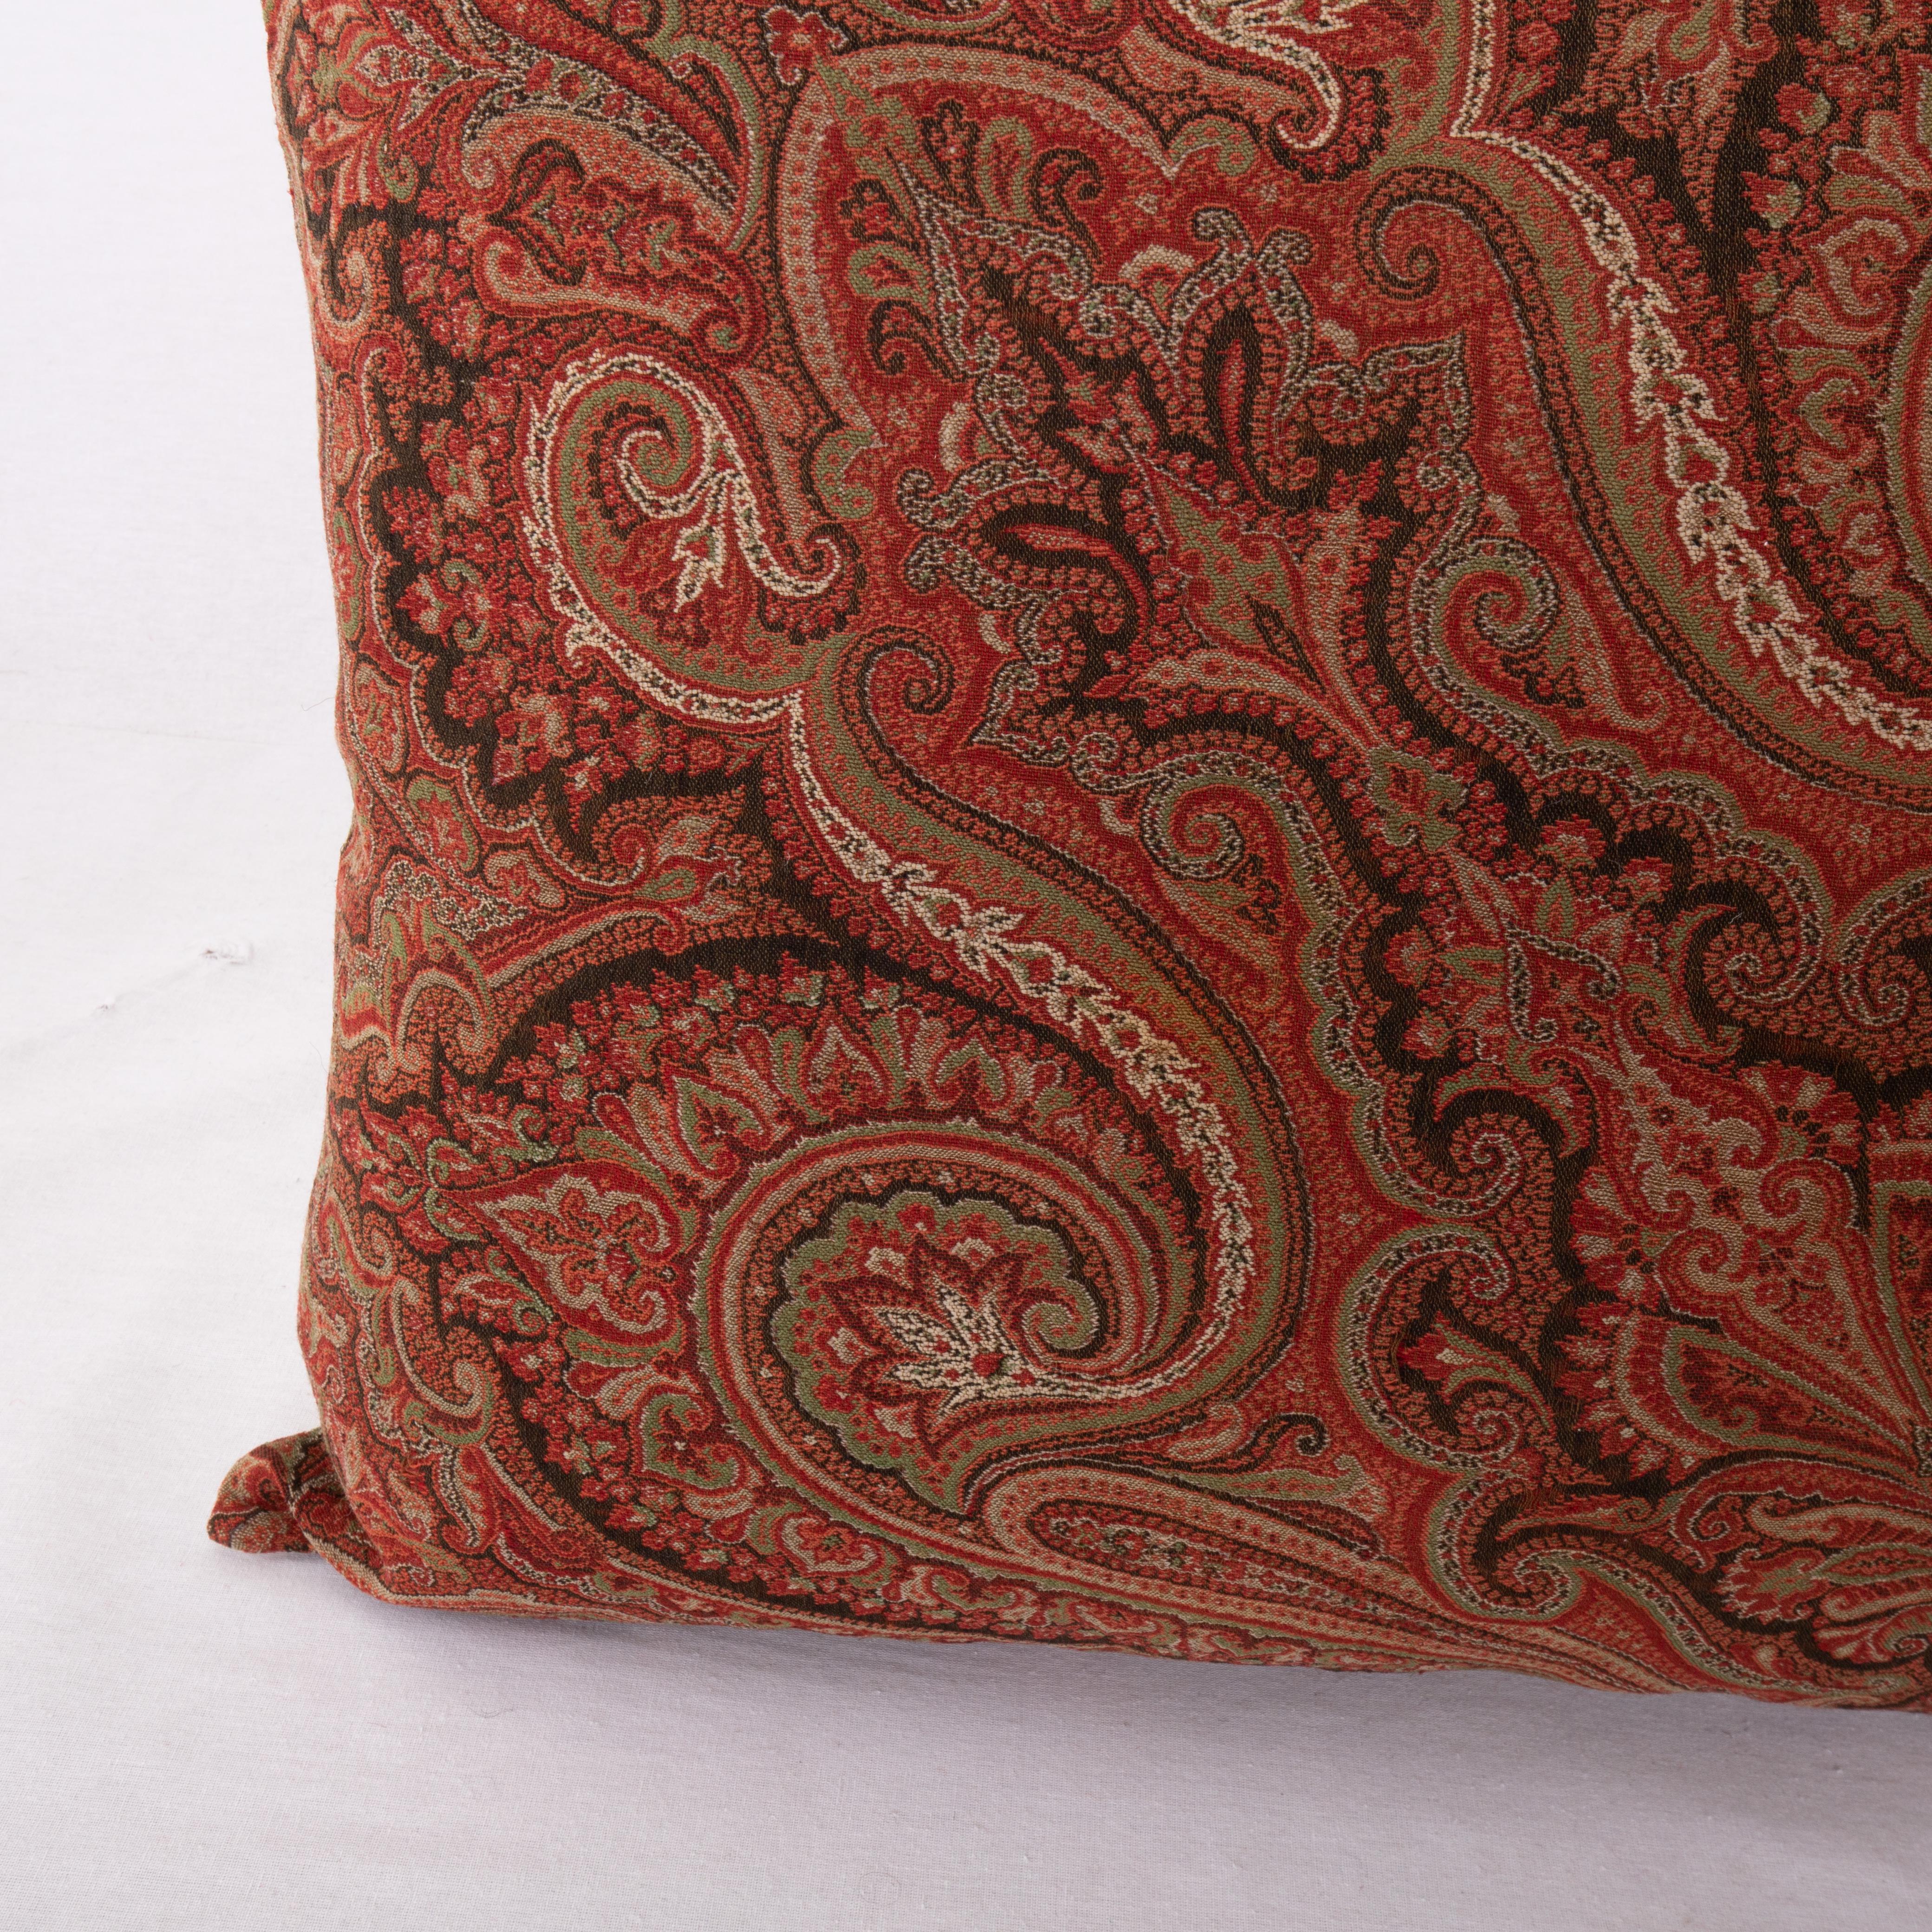 20th Century Antique Pillow Cover Made from a European Wool Paisley Shawl, L 19th/ E. 20th For Sale